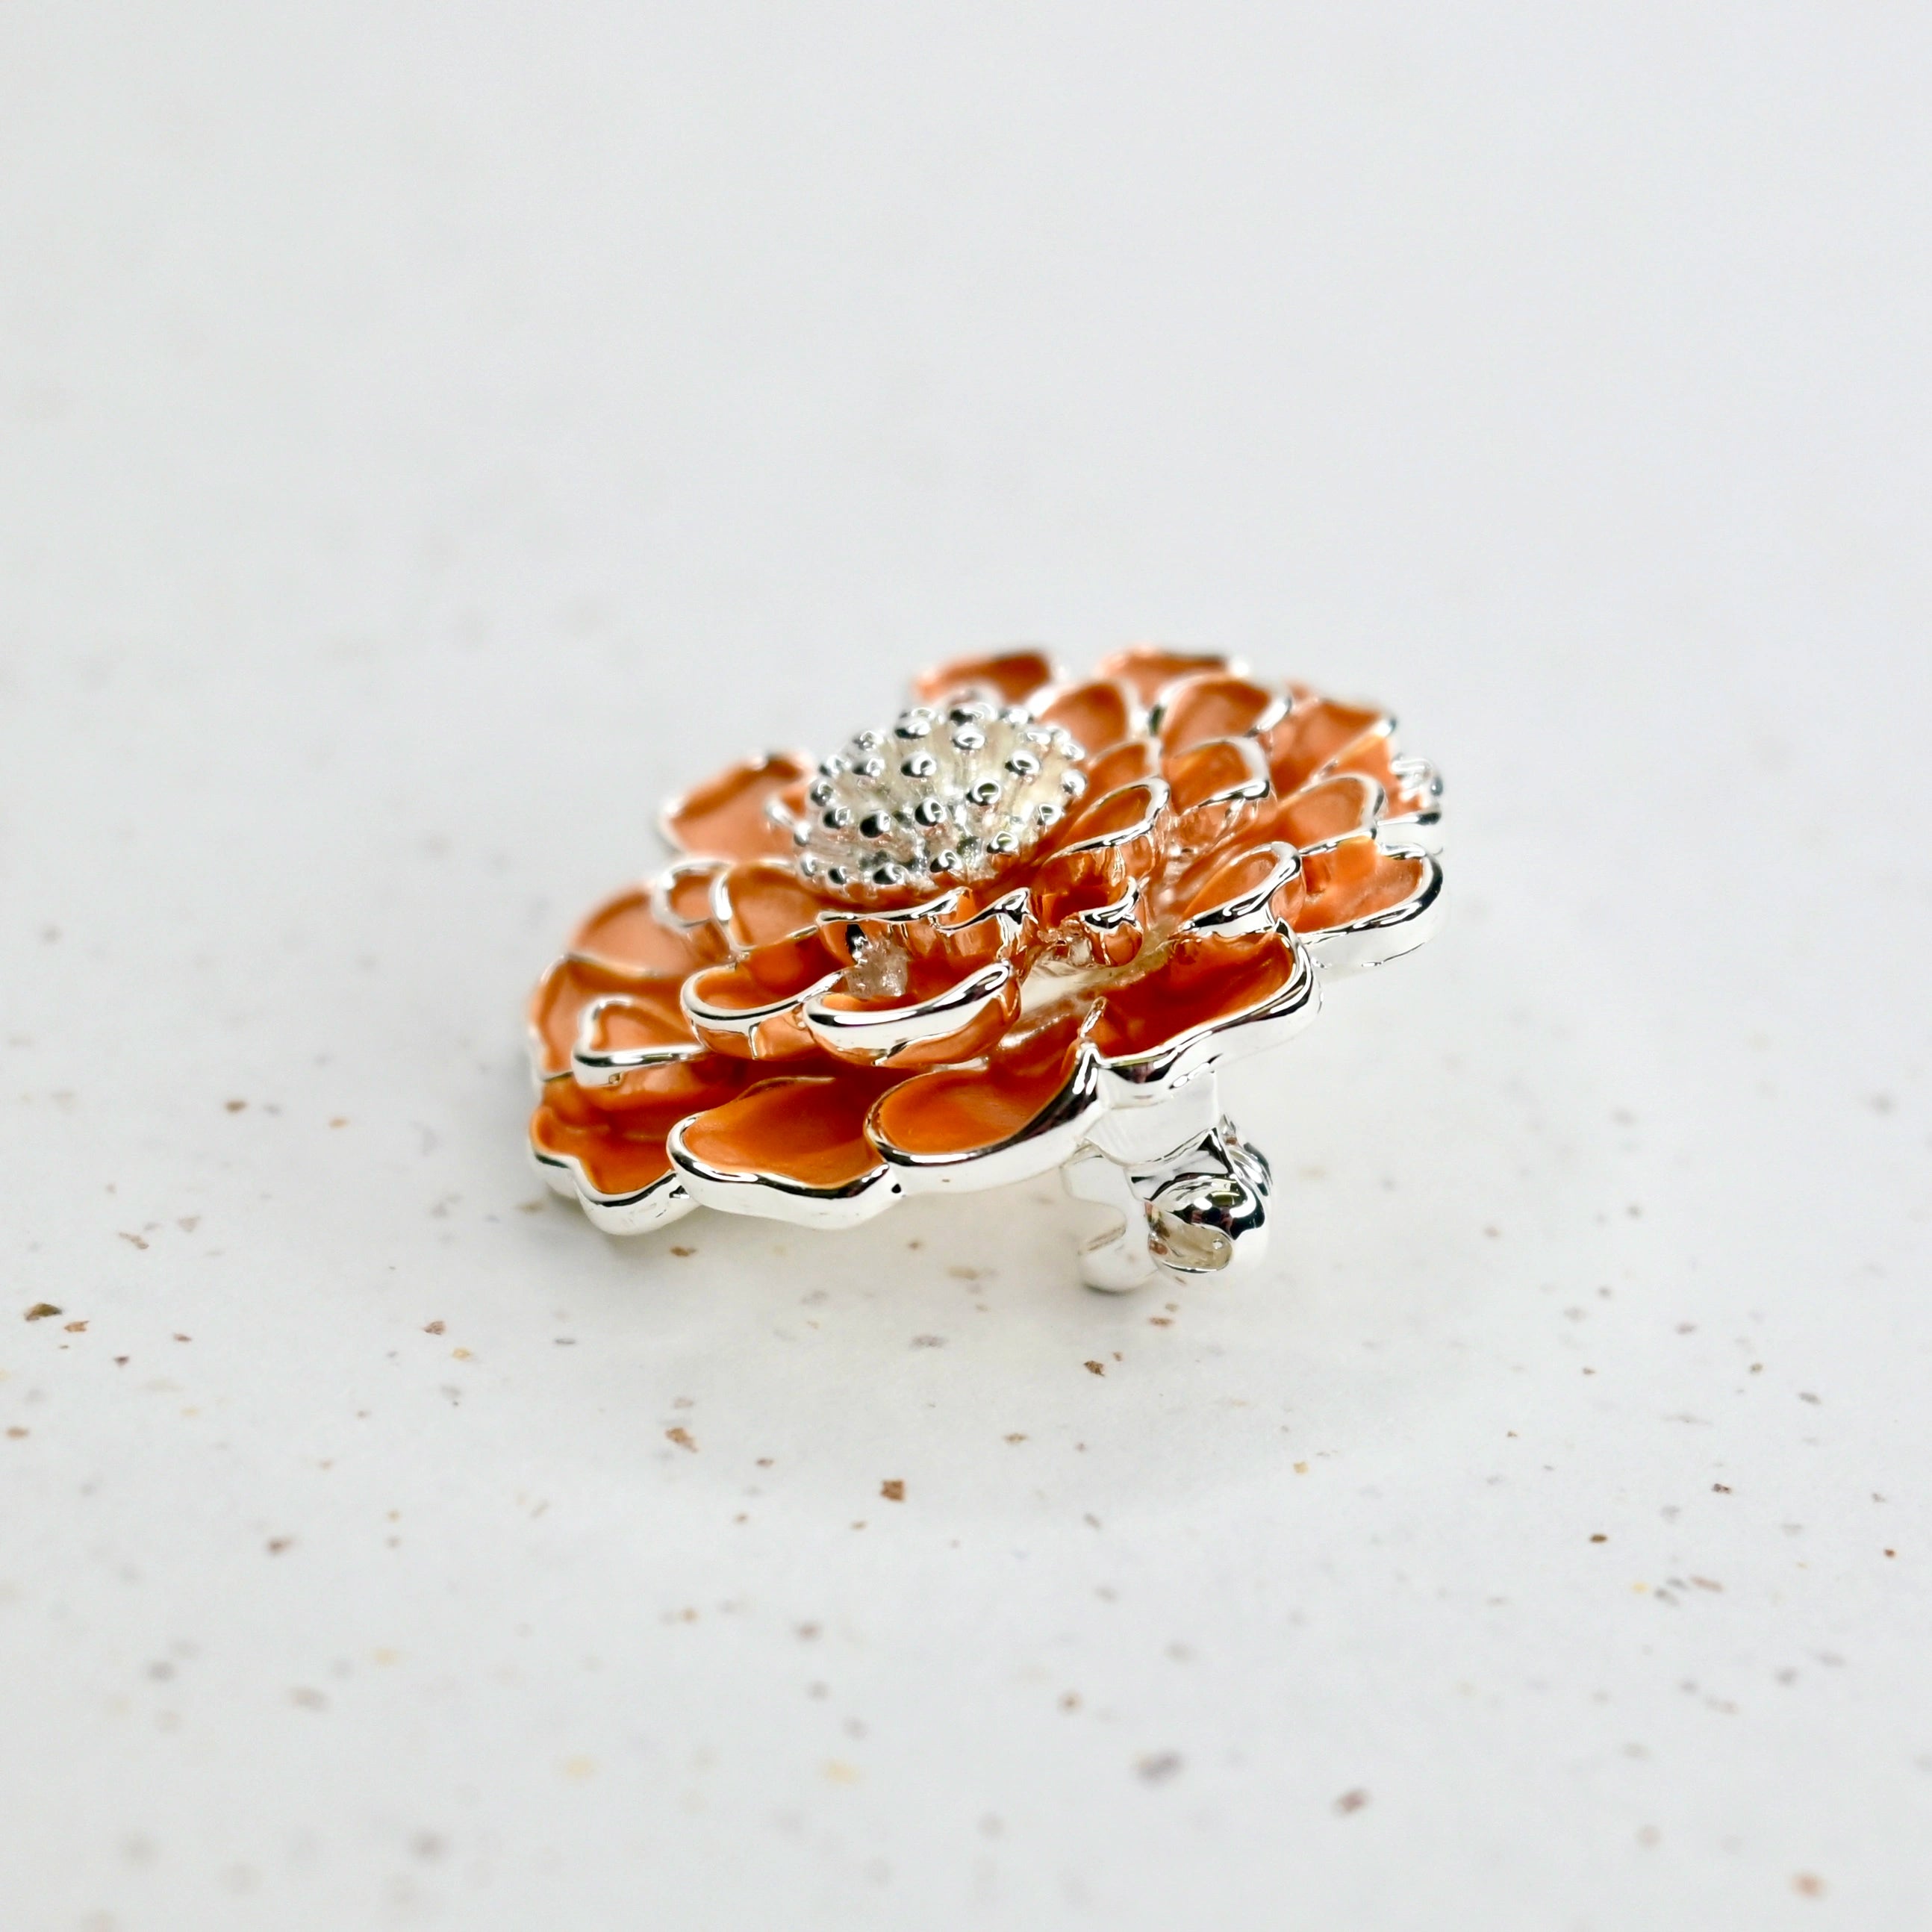 Chawton Marigold Handcrafted Brooch in Silver